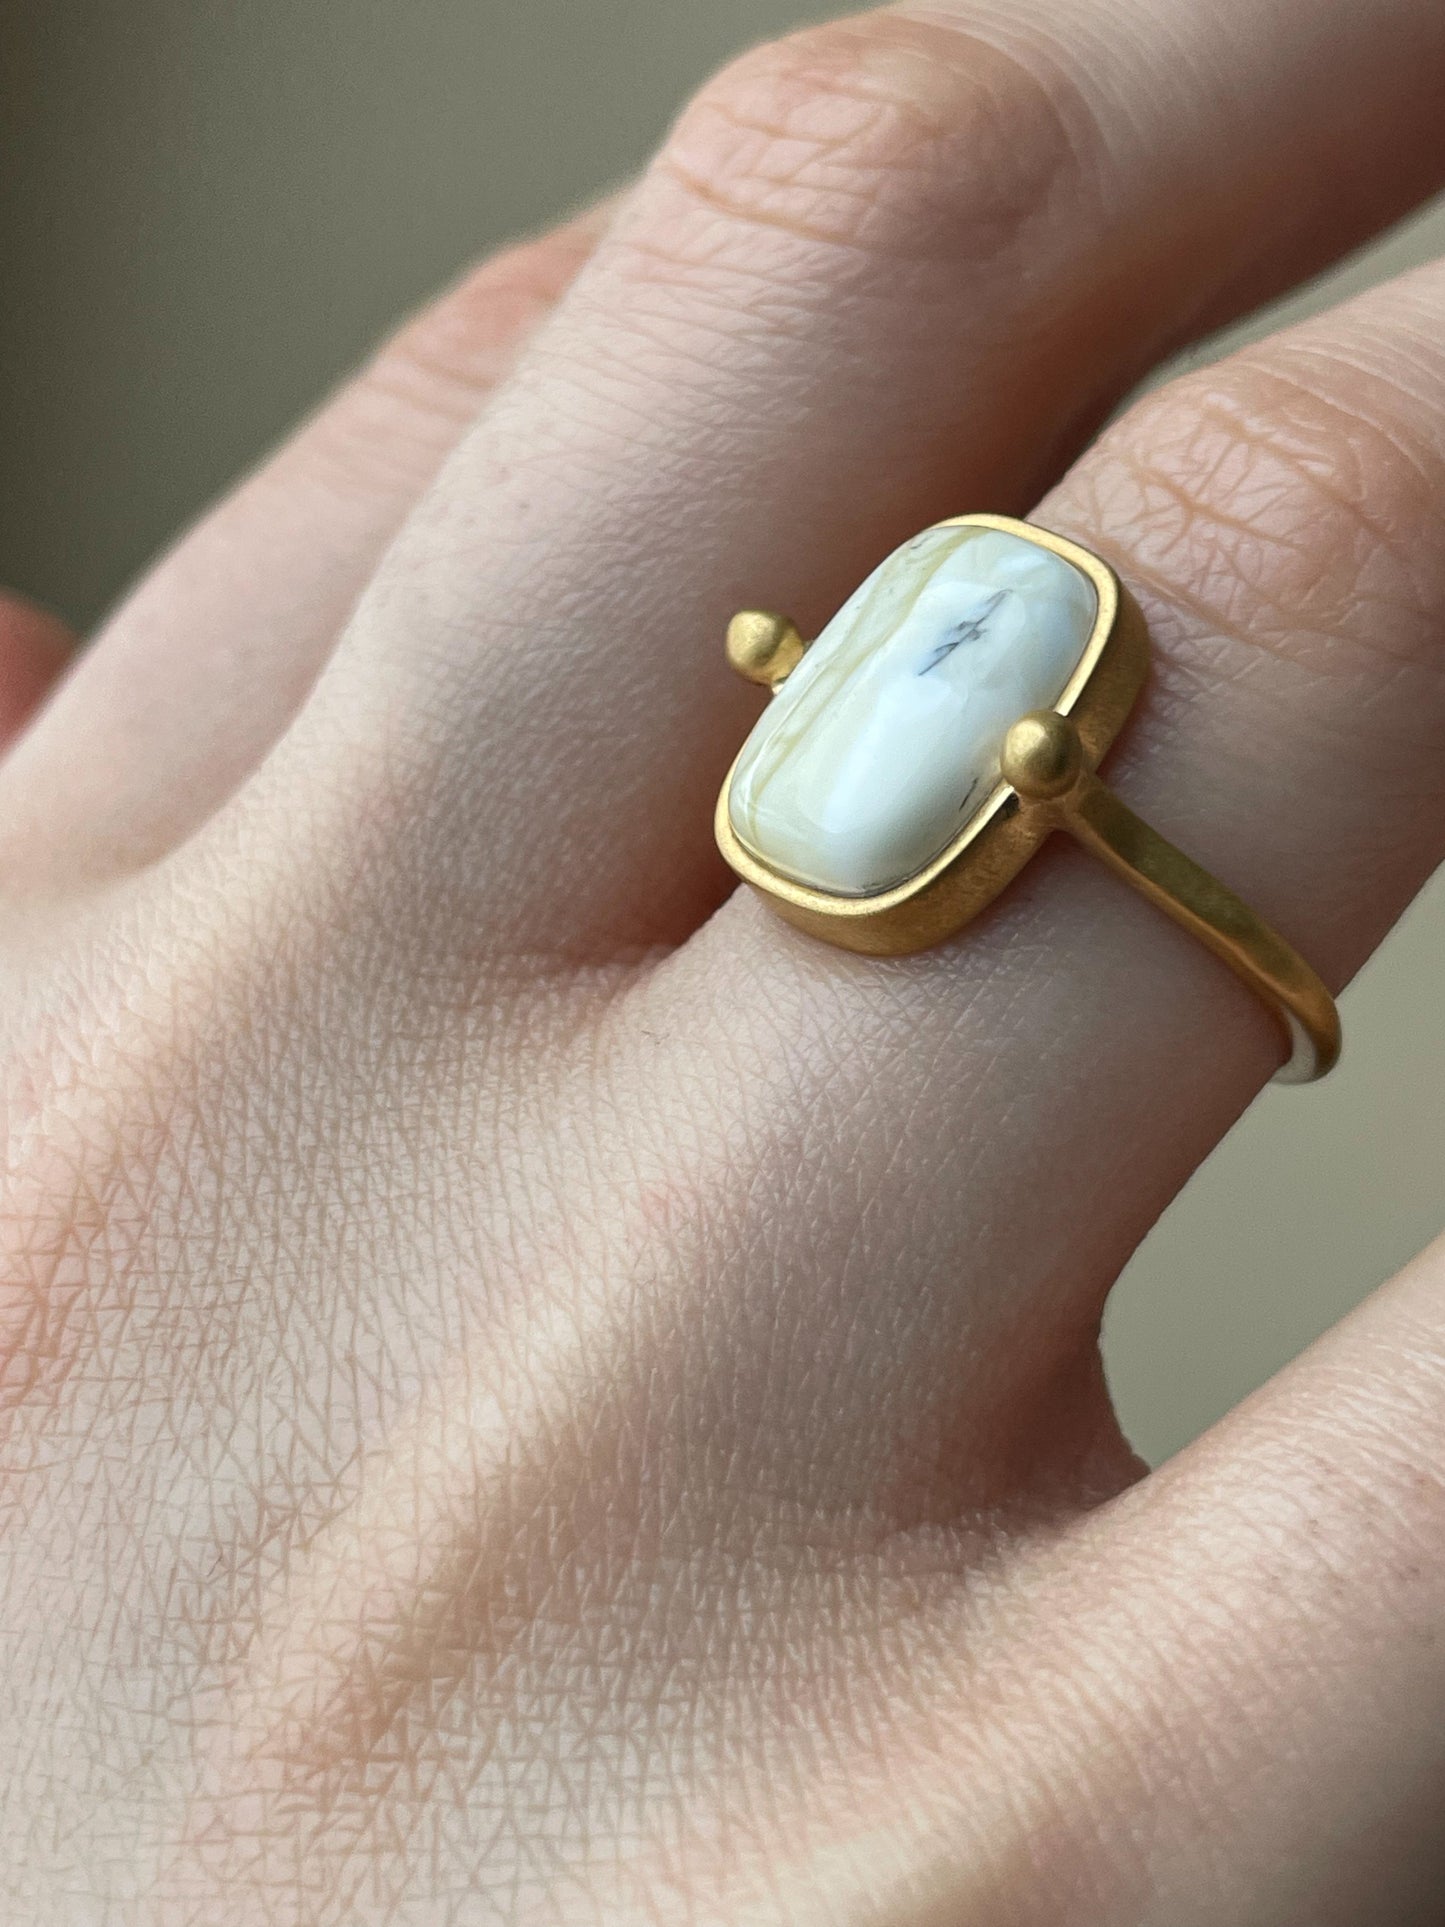 White amber ring - Gold plated silver - Vintage style ring collection - Size 6 1/4